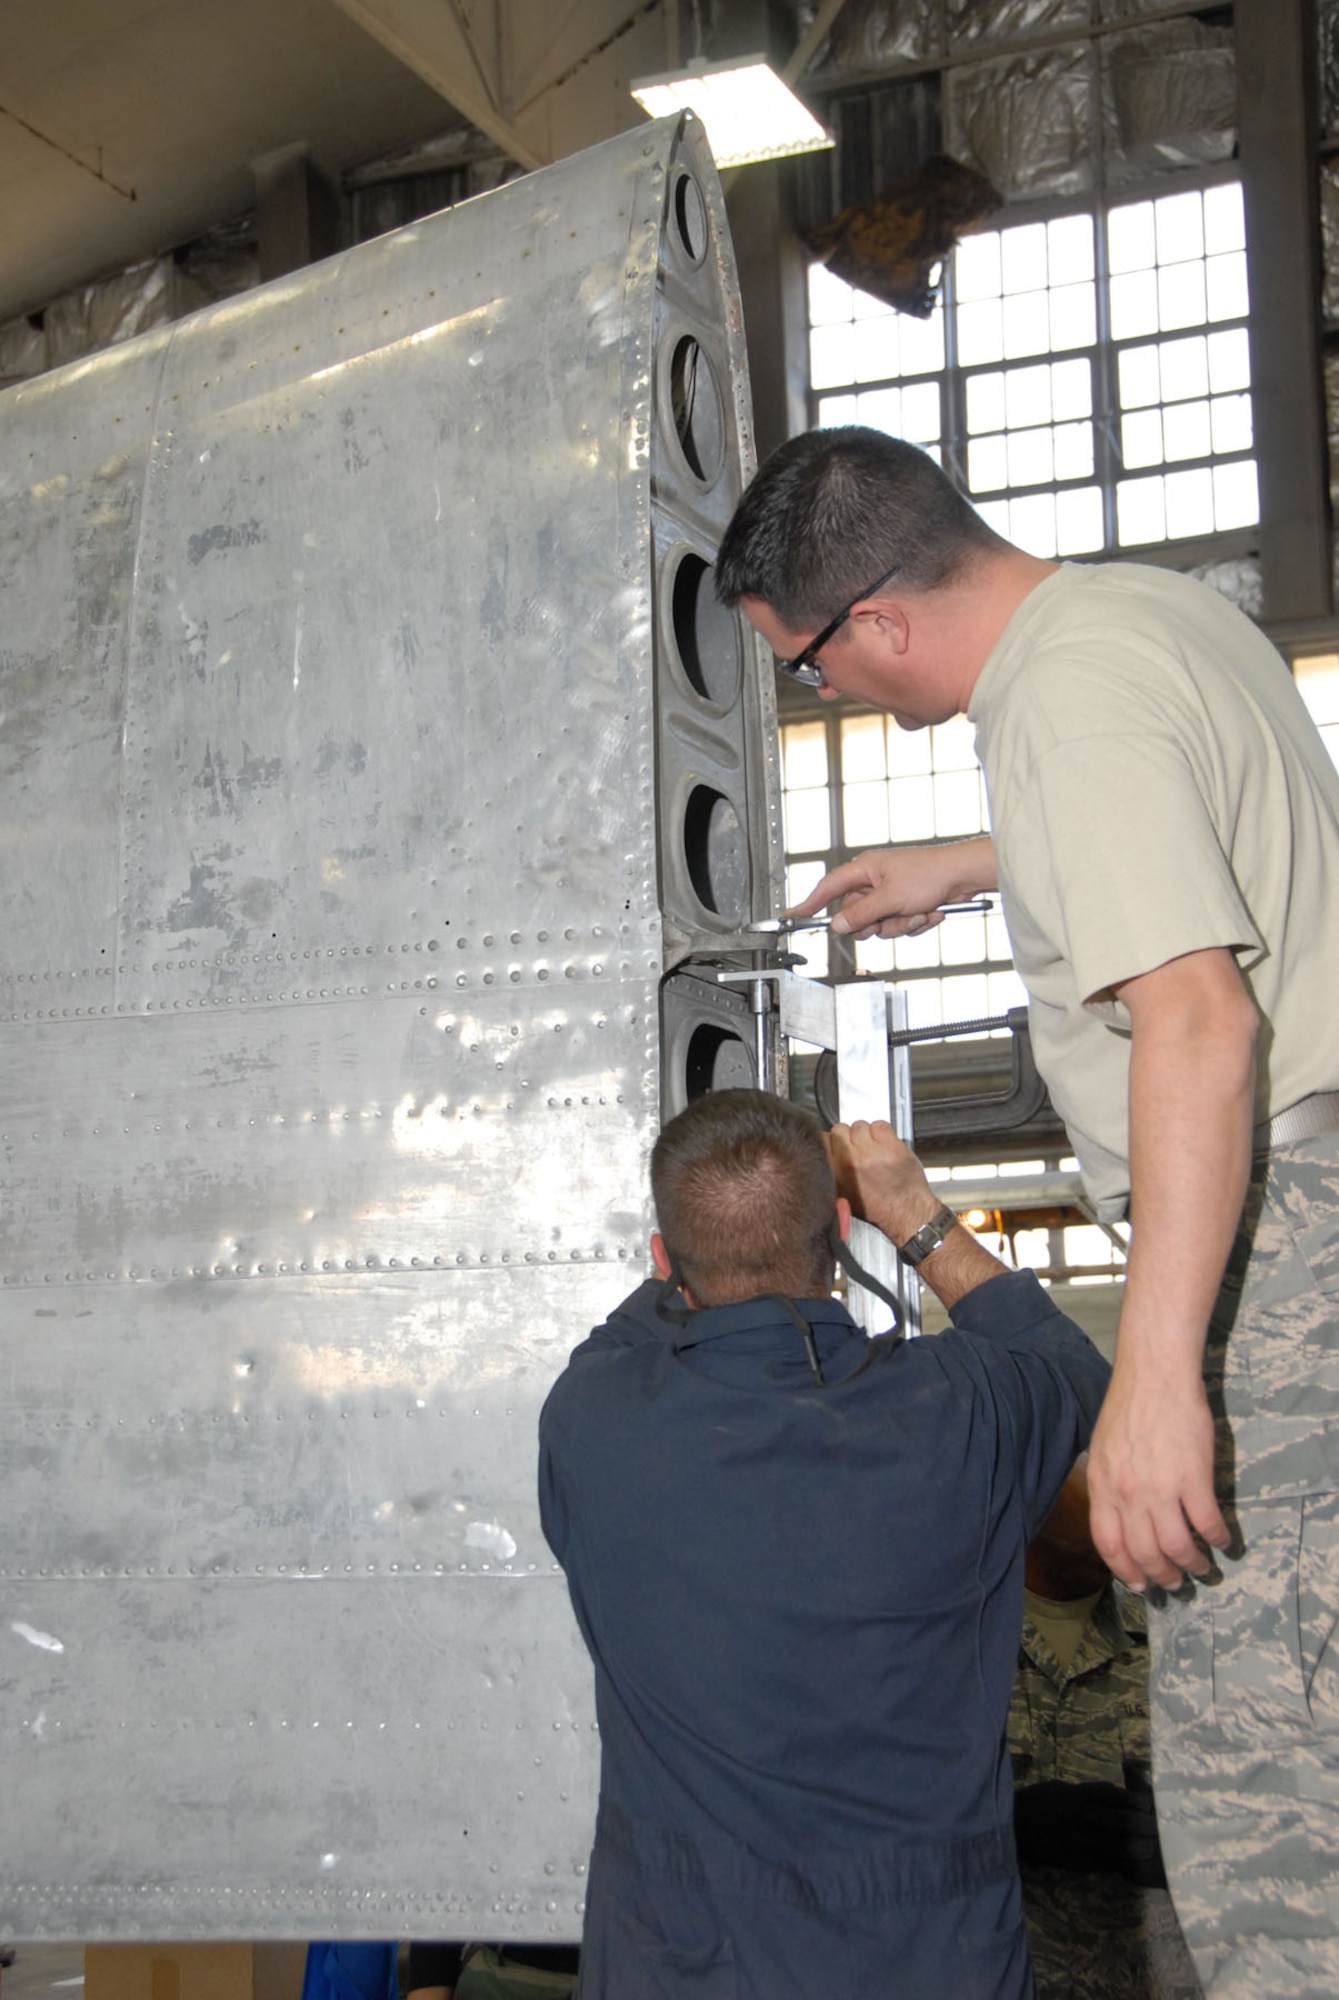 DAYTON, Ohio - Members of the 315th Maintenance Squadron out of Charleston Air Force Base, S.C., piece together a holding fixture for the B-17F Memphis Belle's wing during their two-week stay at Wright-Patterson Air Force Base, Ohio, where the group worked in the restoration hangar at the National Museum of the U.S. Air Force. (U.S. Air Force photo)